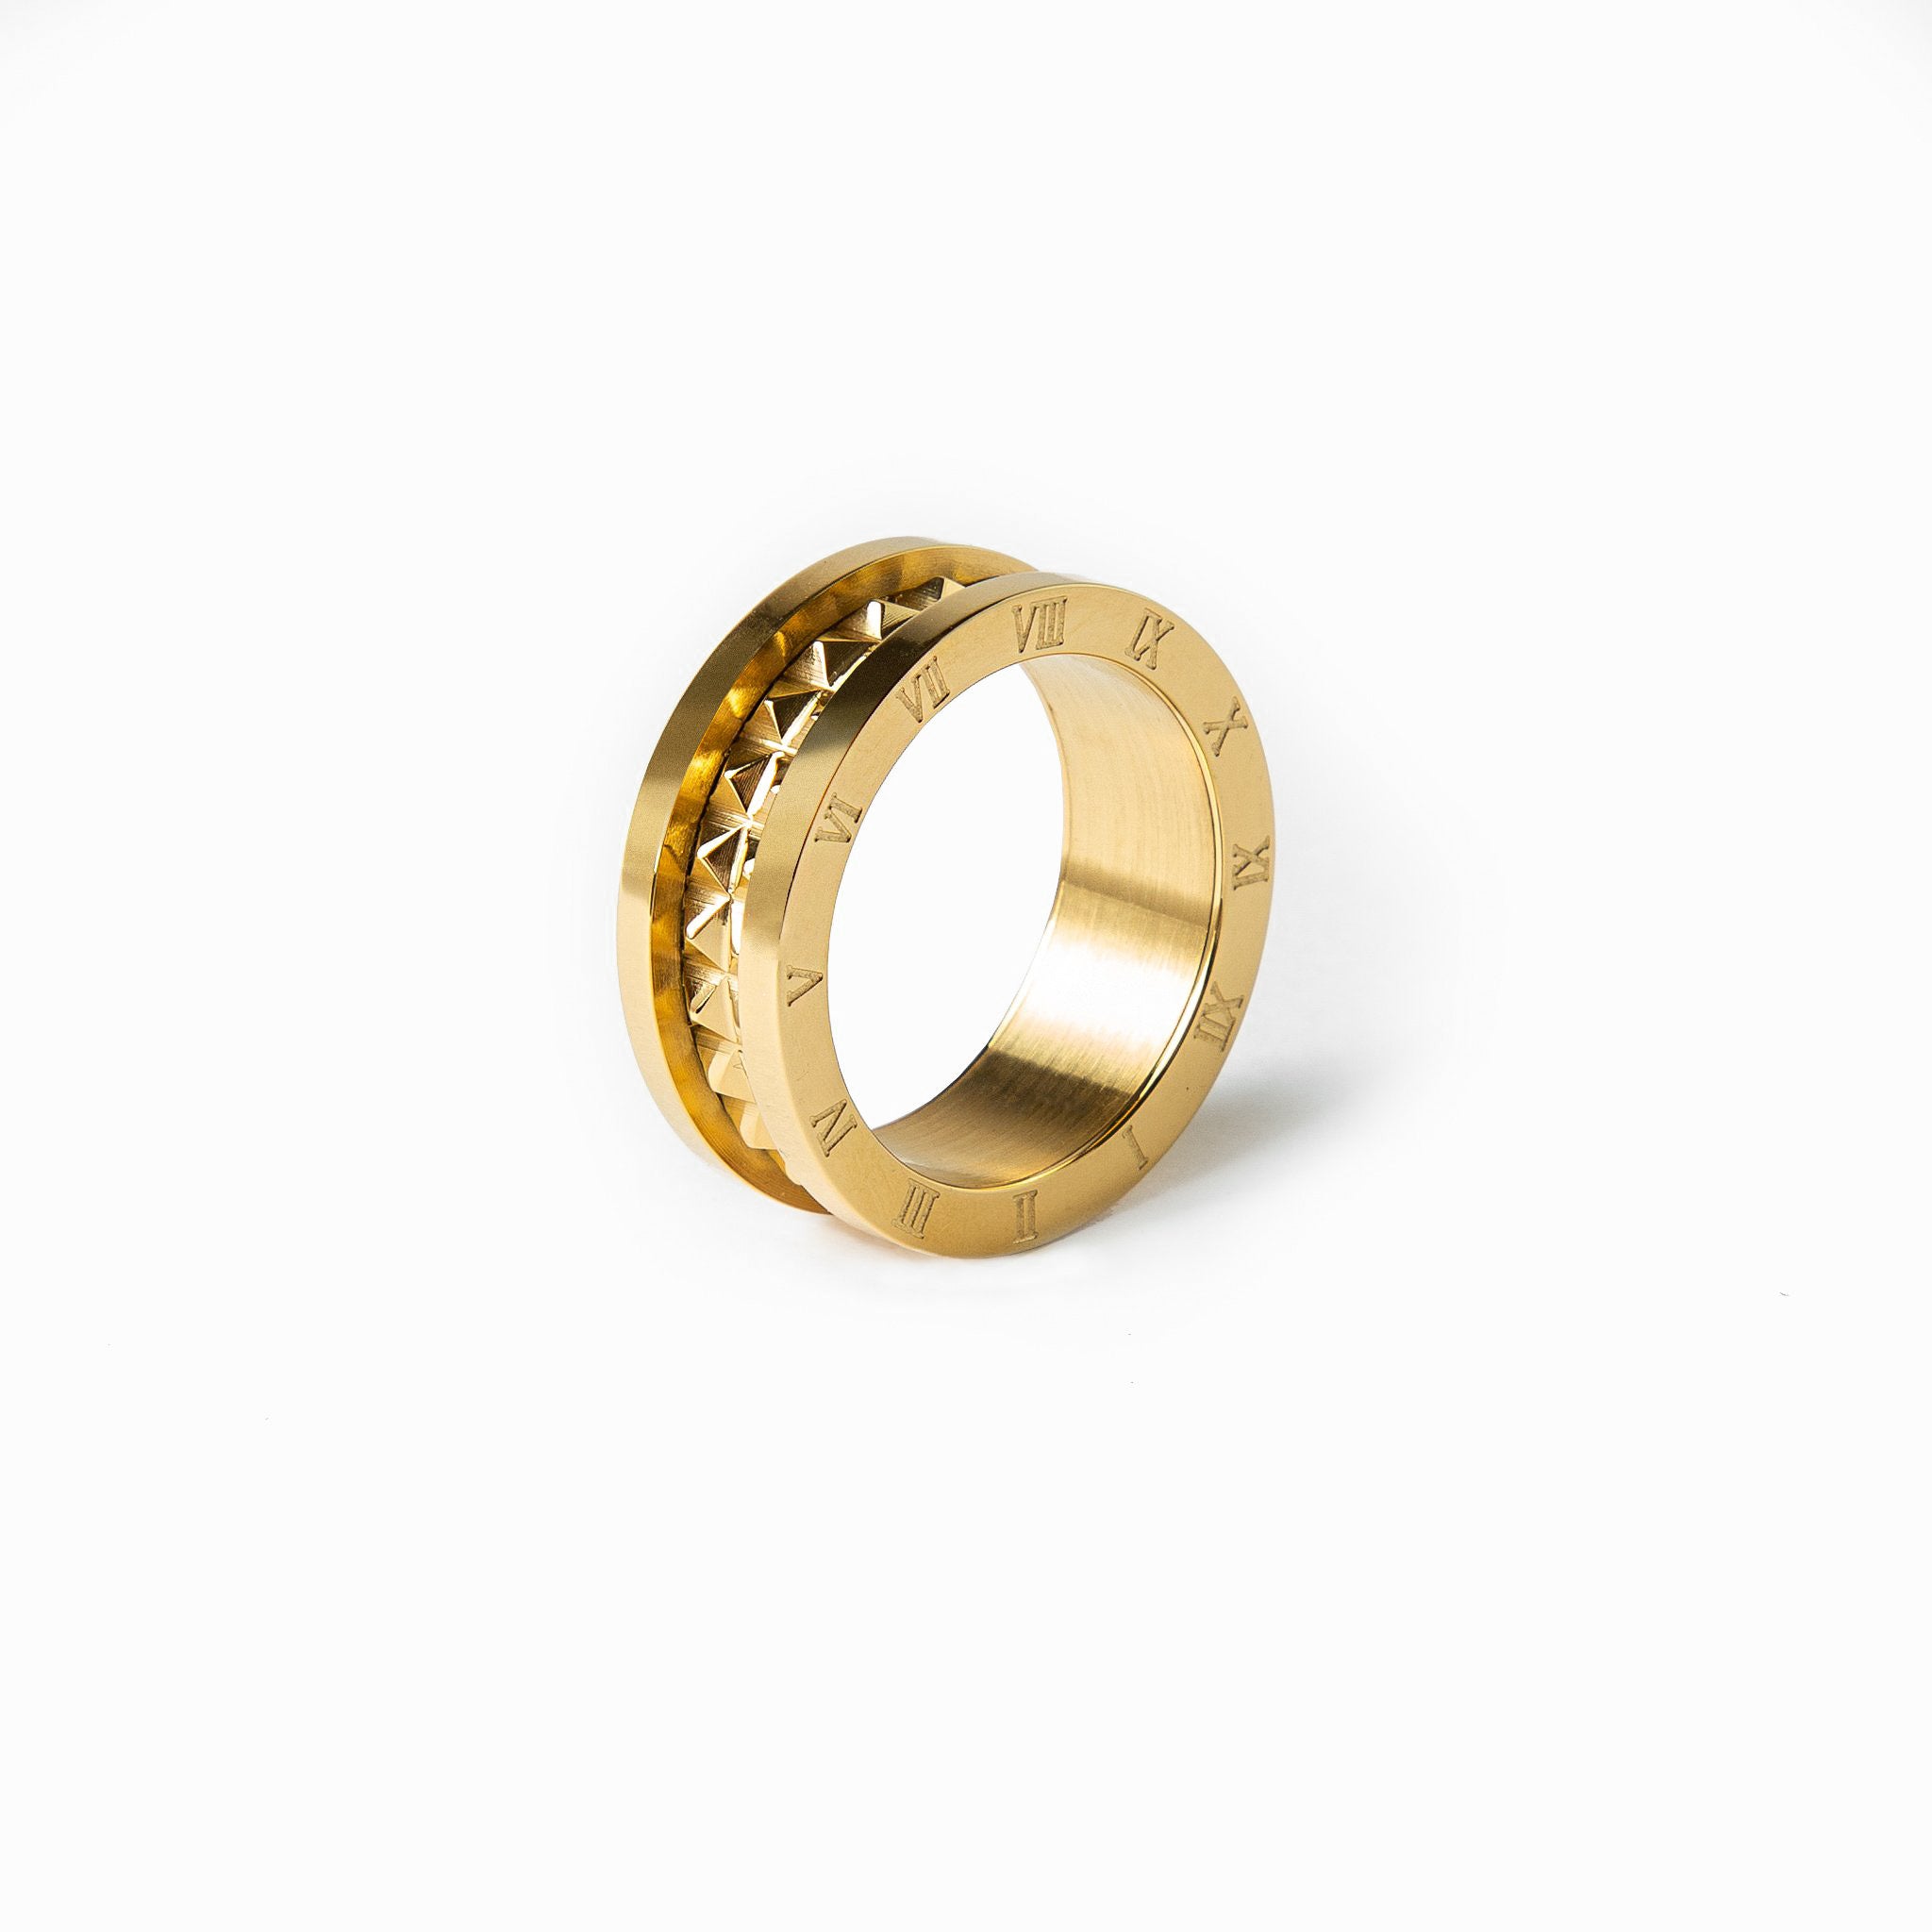 Genoa Ring - Gold – Nevaeh
USE CODE WOLF20 for 20% off